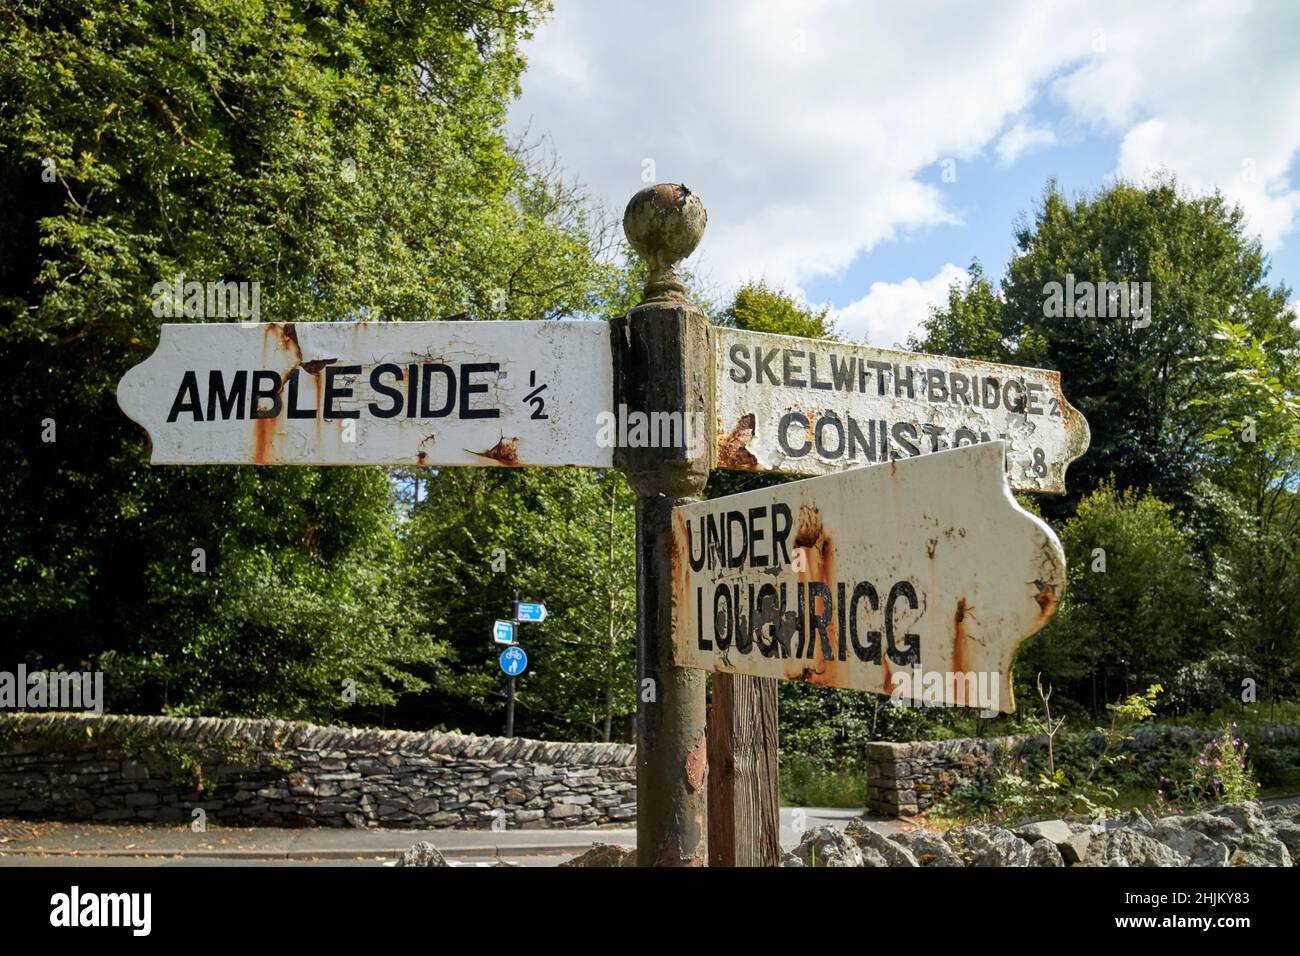 old white painted direction signs for ambleside under loughrigg skelwith bridge and coniston lake district, cumbria, england, uk Stock Photo